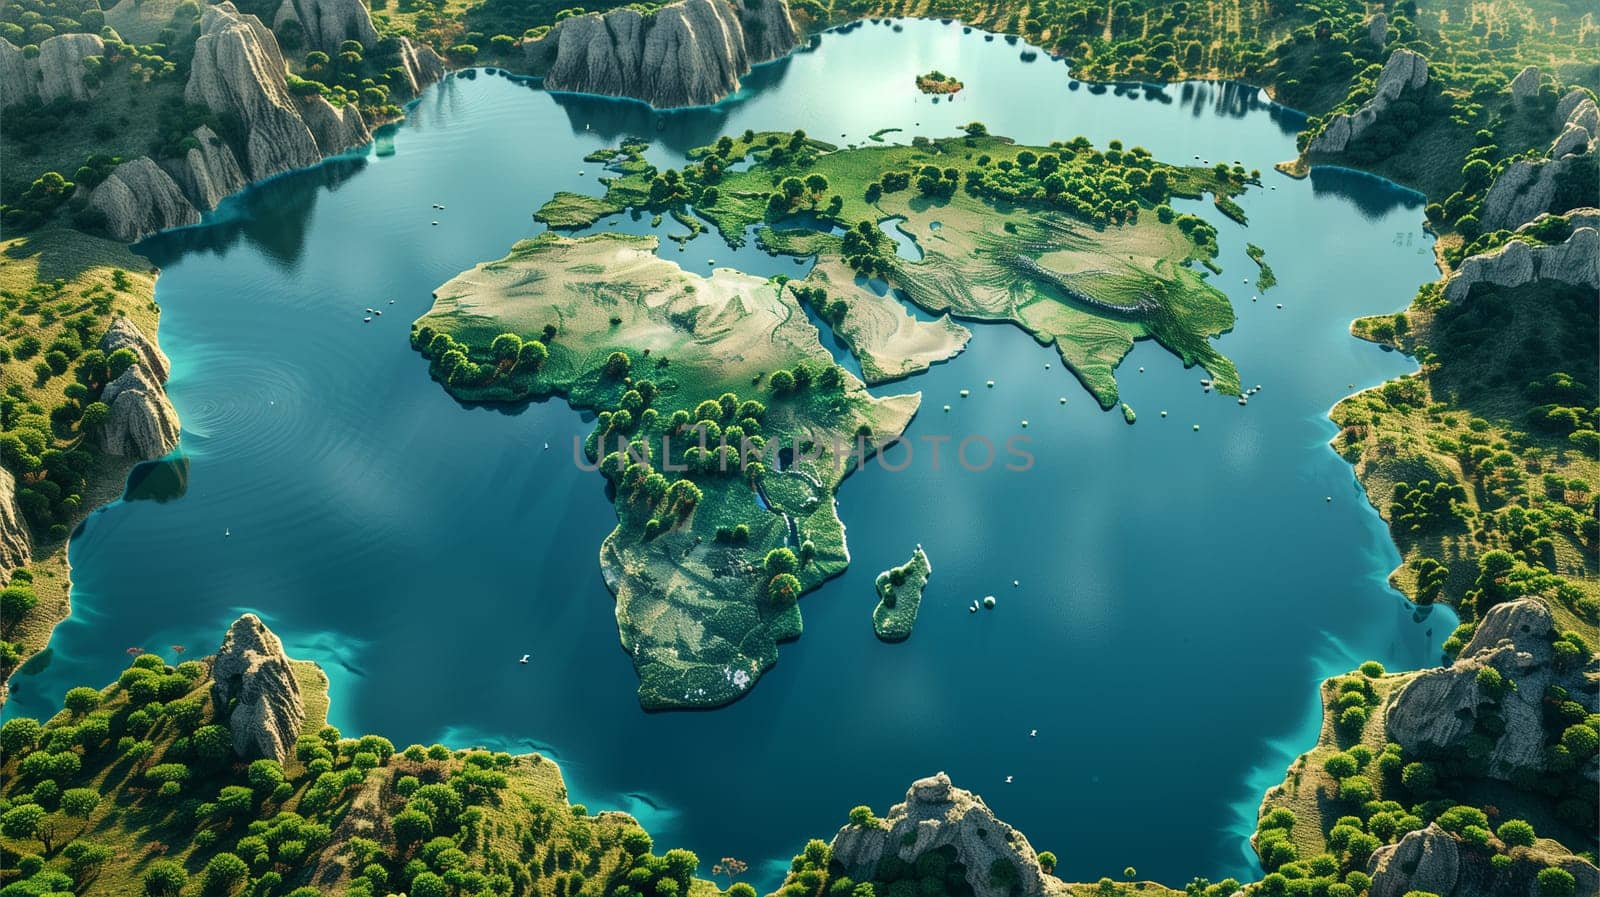 A scaled-down representation of Africa floating in a serene body of water with lush landscapes.